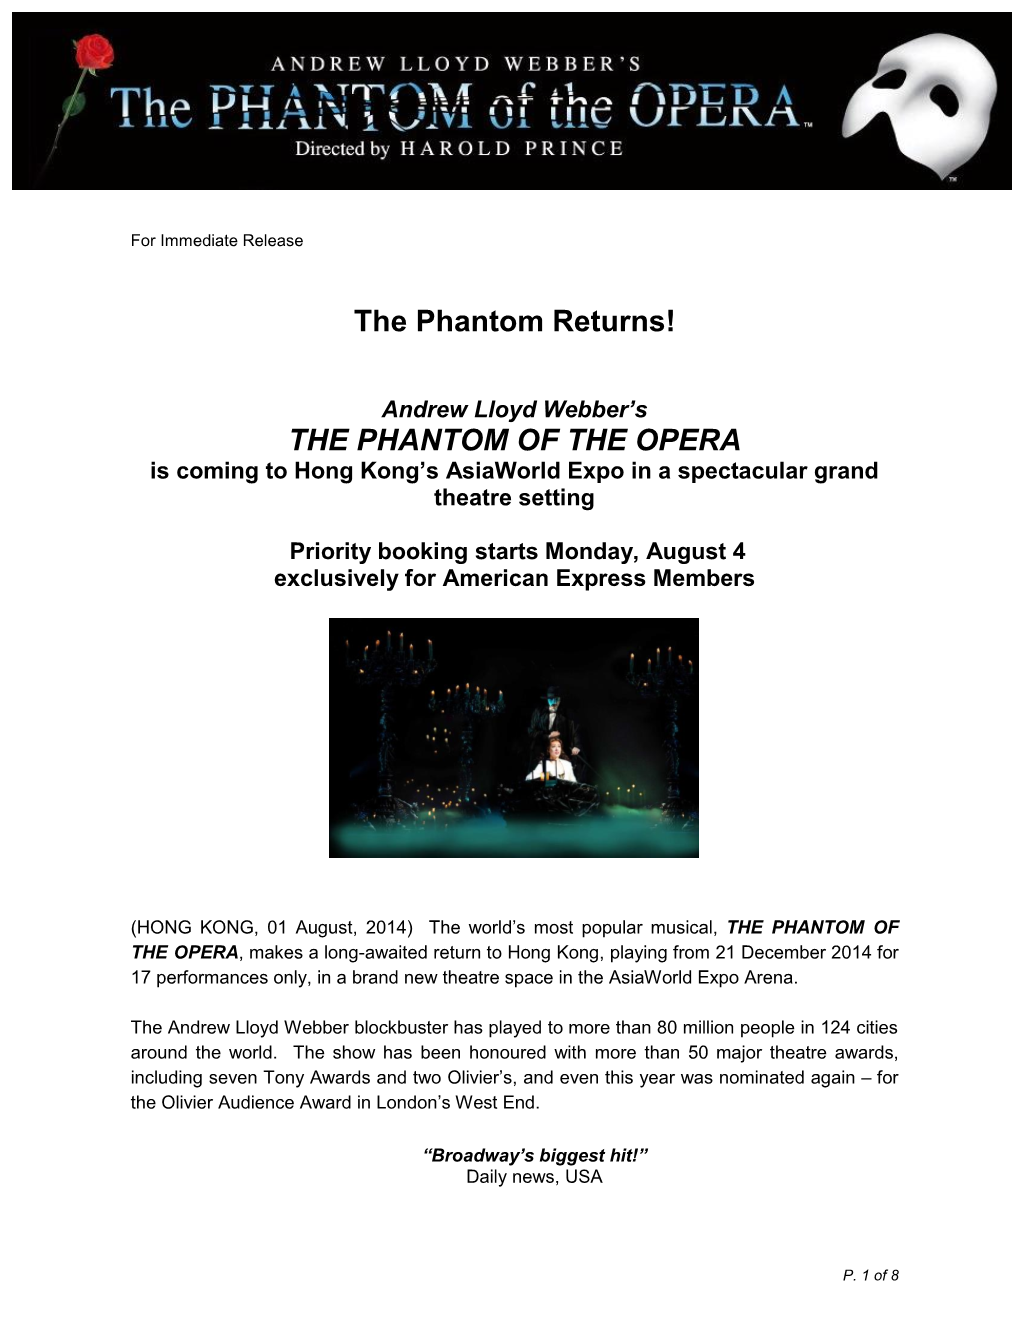 THE PHANTOM of the OPERA Is Coming to Hong Kong’S Asiaworld Expo in a Spectacular Grand Theatre Setting